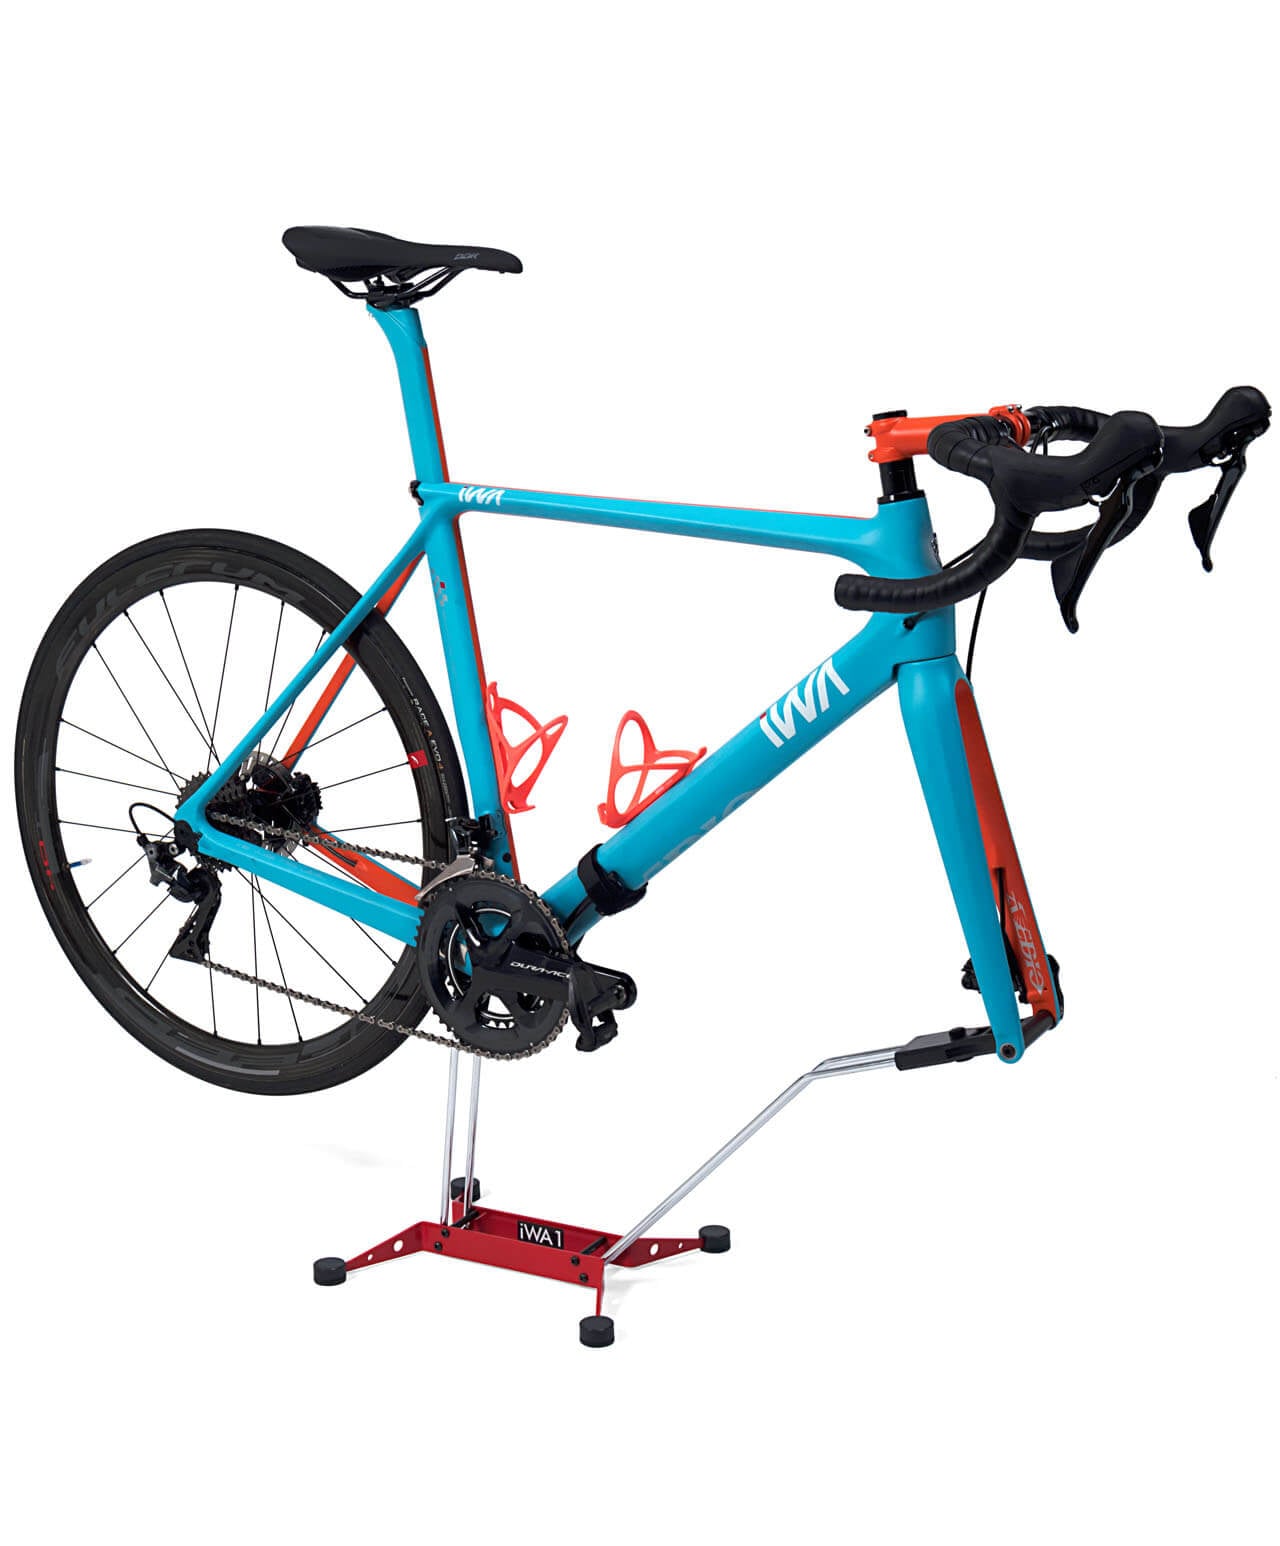 iWA1+FS - Bike display and maintenance rack with fork support adapter